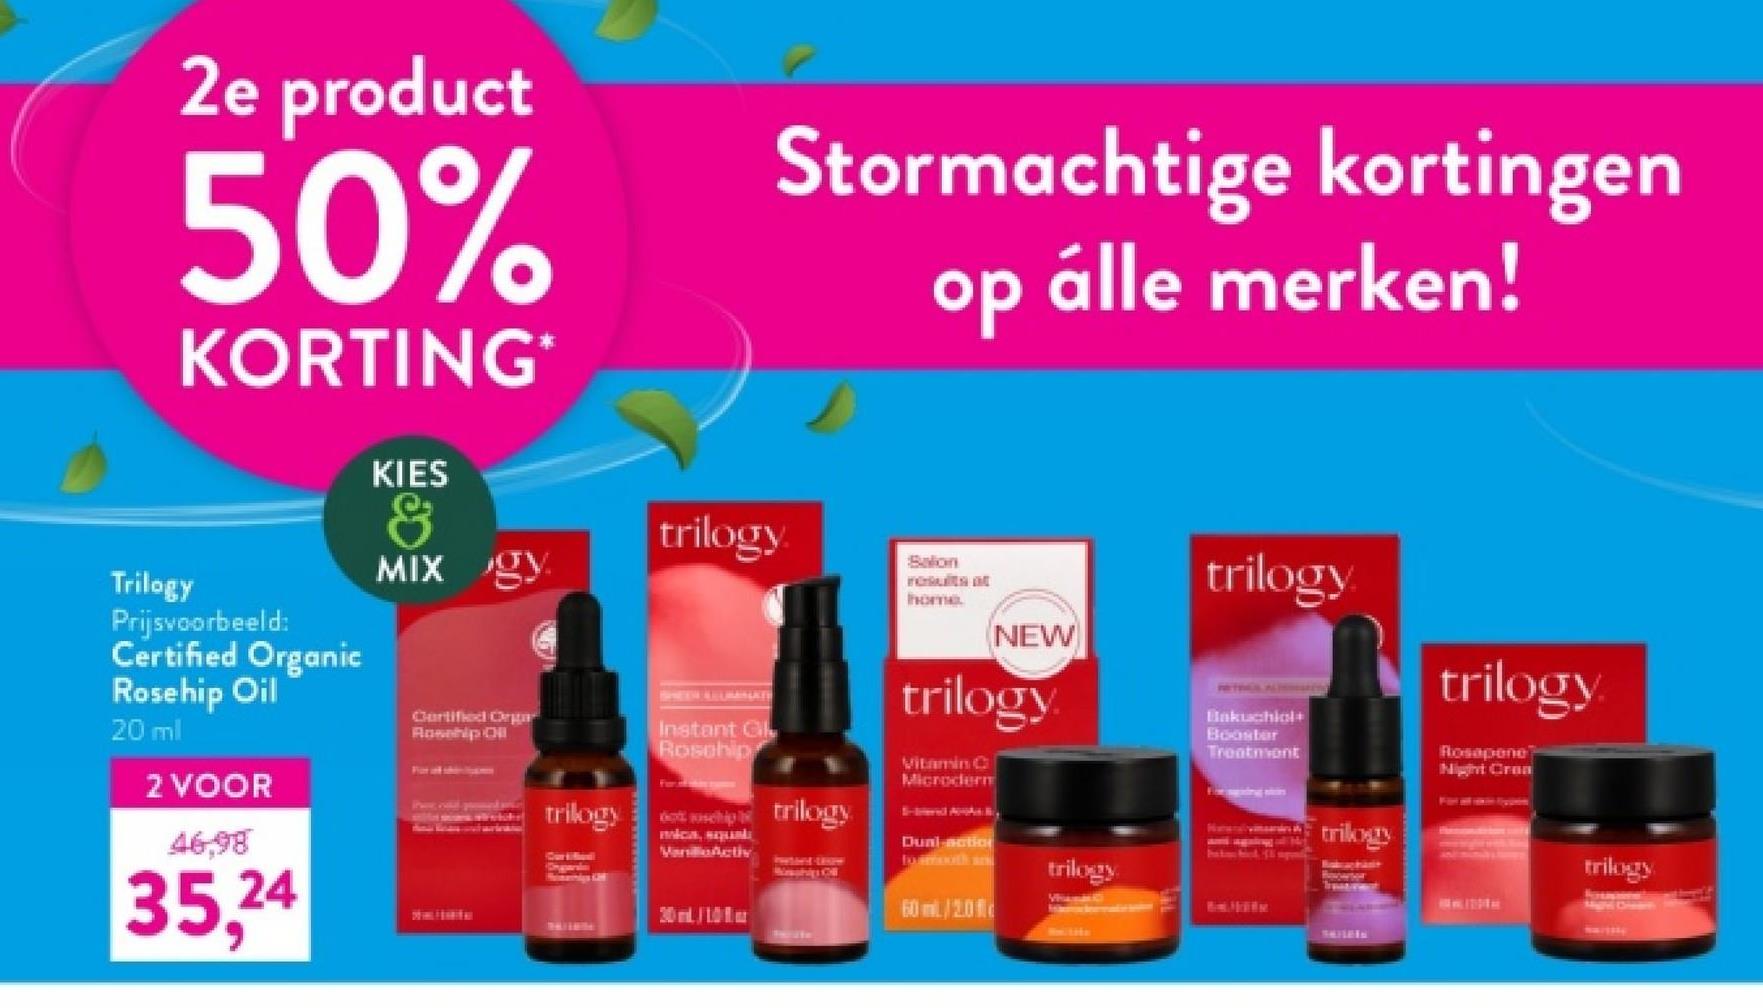 2e product
50%
KORTING*
Trilogy
Prijsvoorbeeld:
Certified Organic
Rosehip Oil
20 ml
2 VOOR
46,98
35,24
KIES
&
MIX gy
Certified Orga
Rosehip Oil
trilogy
Stormachtige kortingen
trilogy.
SHEER ALURANATI
Instant Gl
Rosehip
dot ship trilogy
mica, su
VanActiv
20/10
iwant-trow
op álle merken!
Salon
results at
home
NEW
trilogy
Vitamin C
Microderm
Dual-action
forimooth an
60 ml/20
trilogy
trilogy
Bakuchiol
Booster
Treatment
trilogy
PERLING
trilogy
Rosapene
Night Crea
trilogy